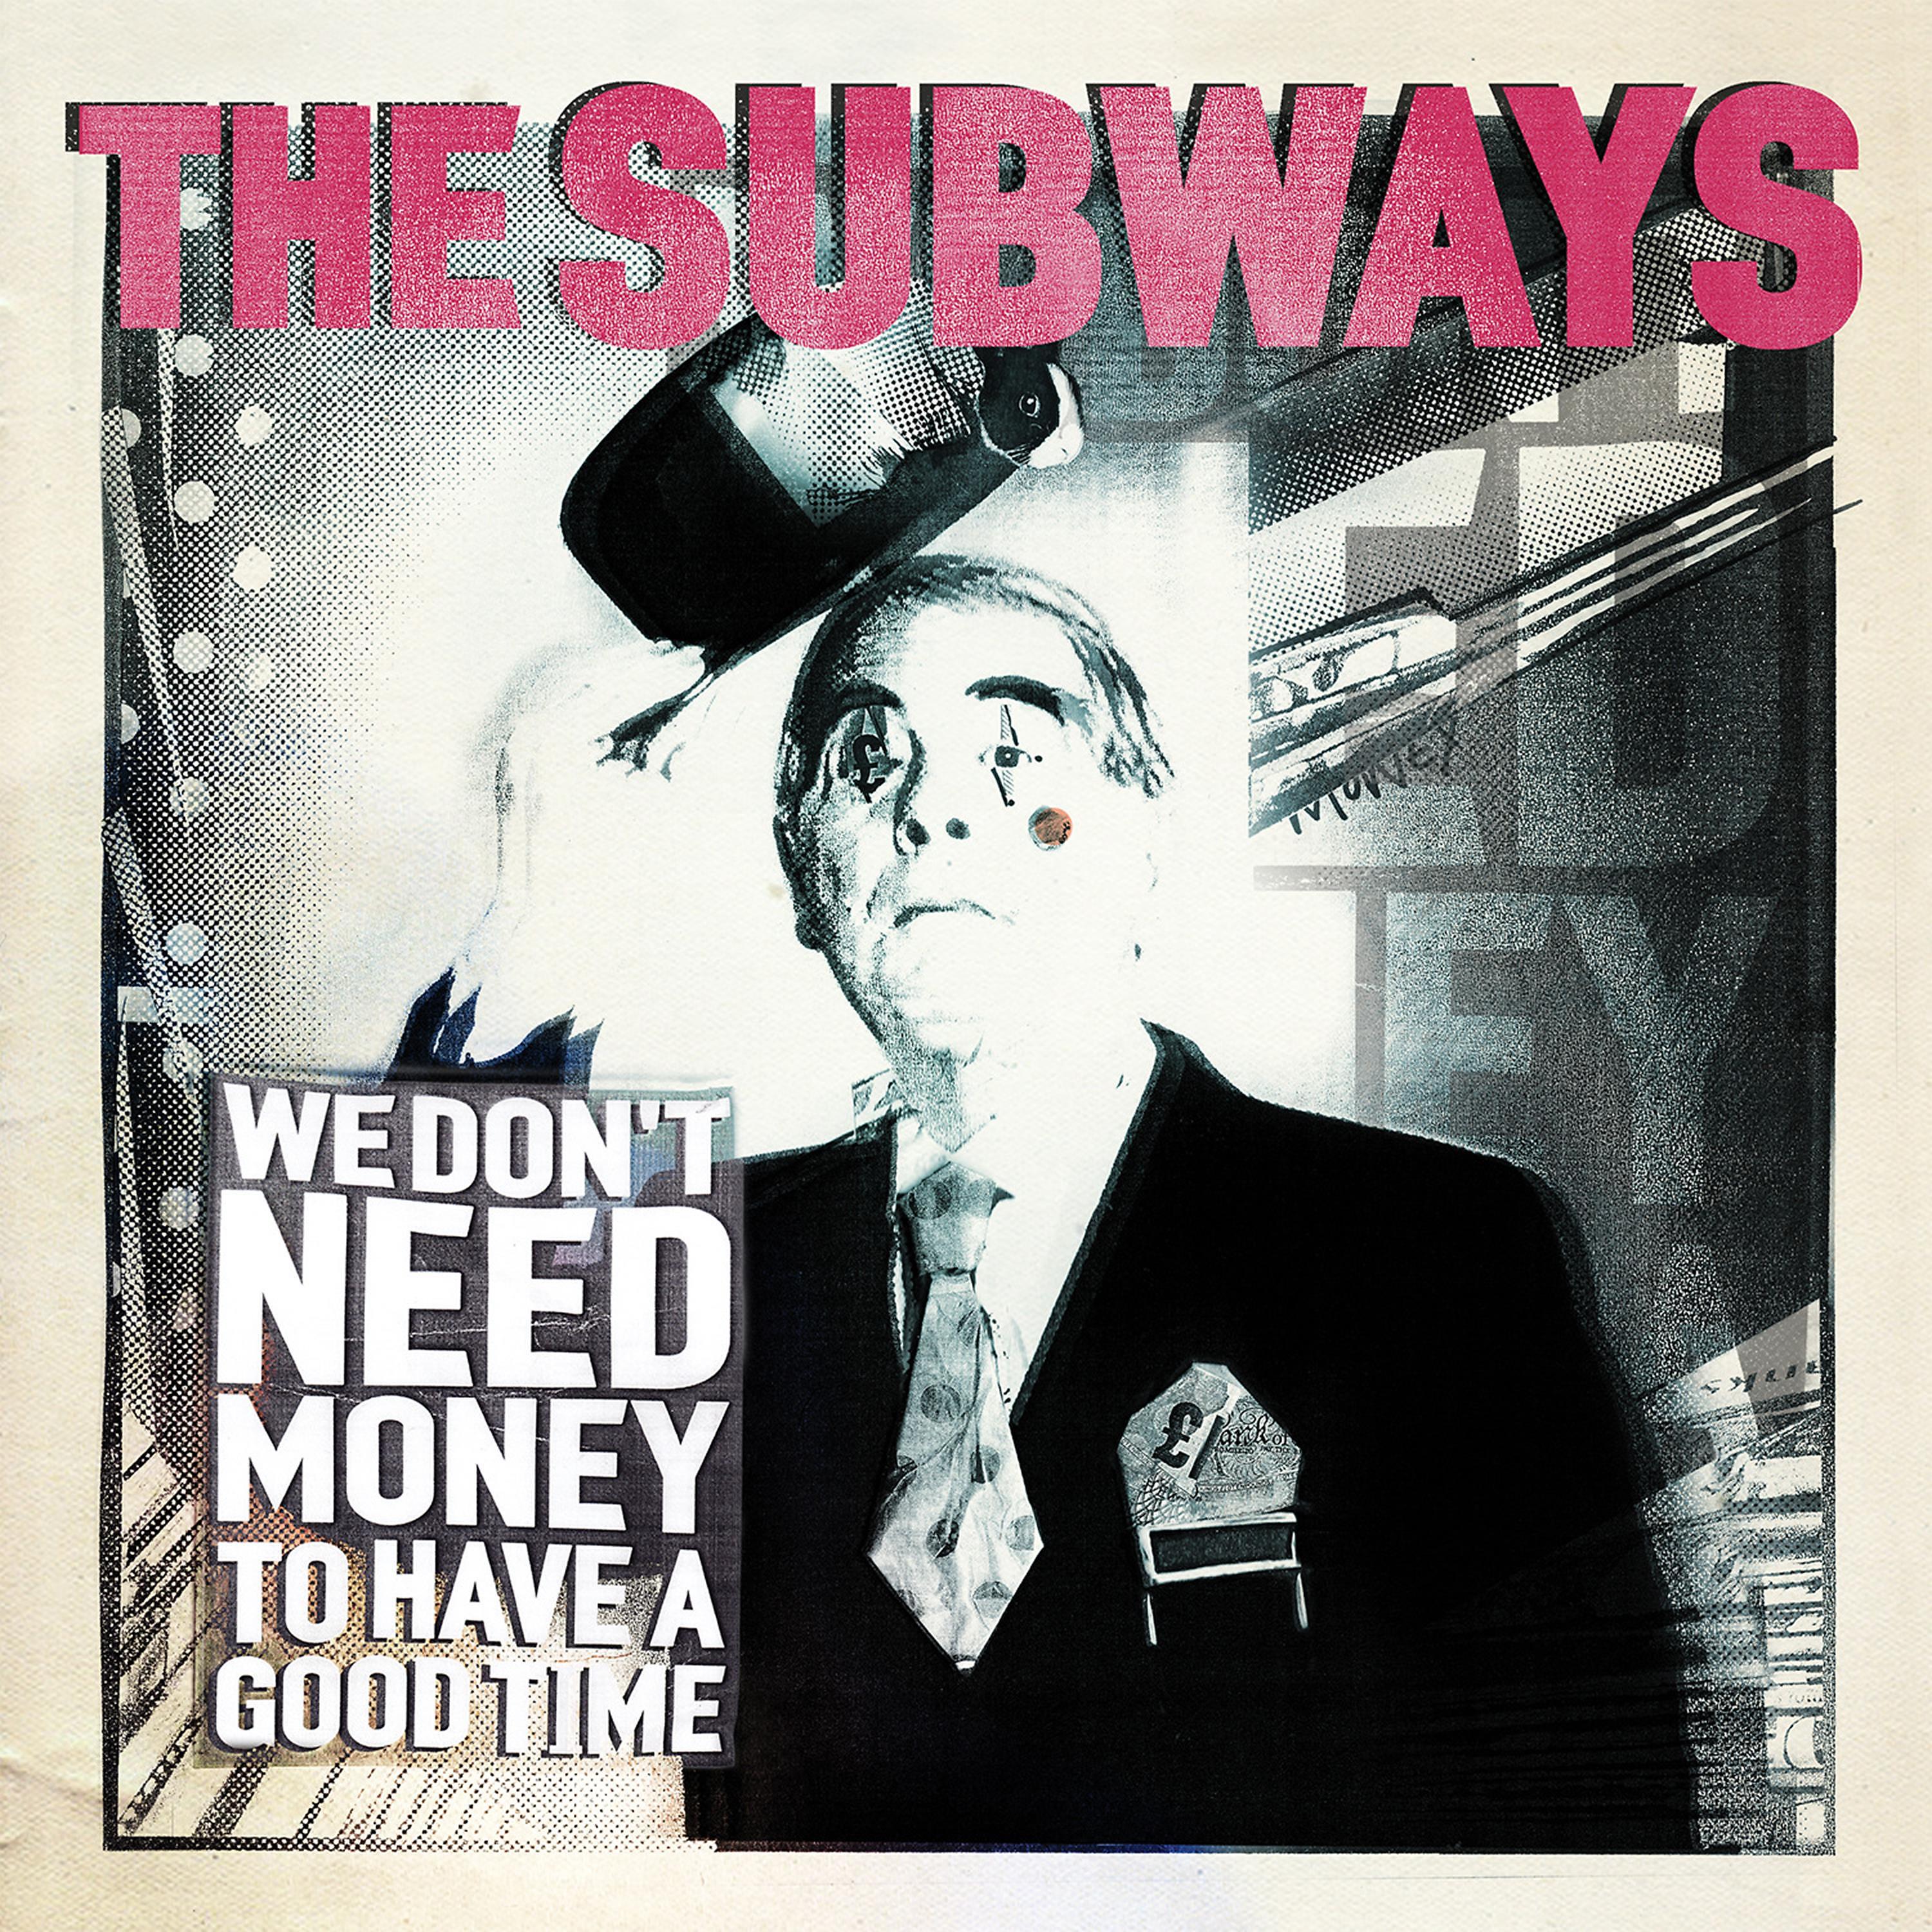 Have a good time. The Subways обложка. Subway. Don't need money.